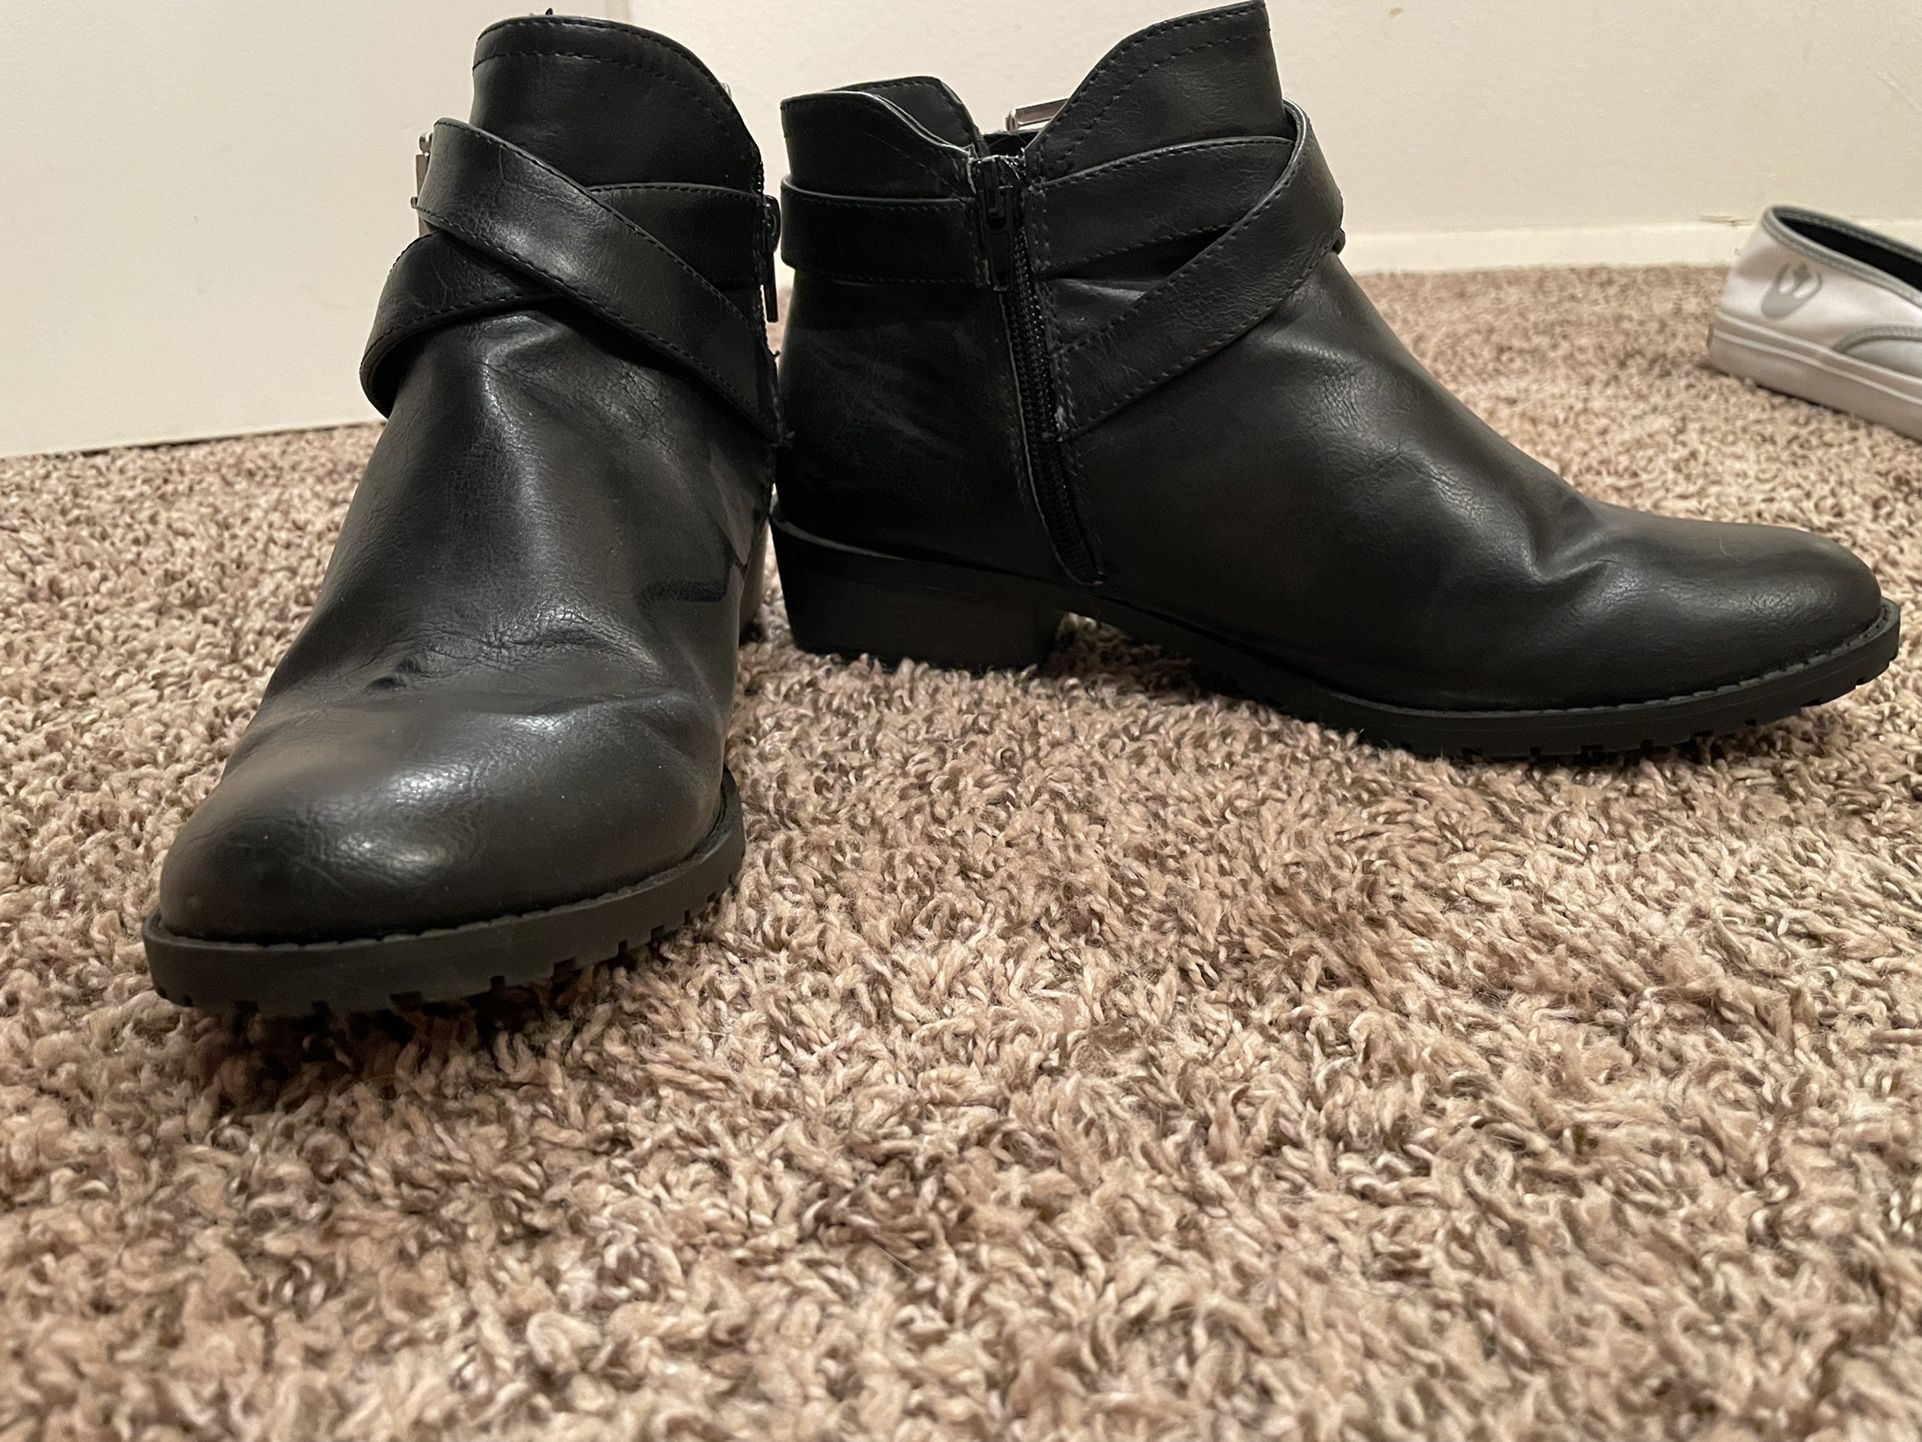 Patent Faux-leather Booties 